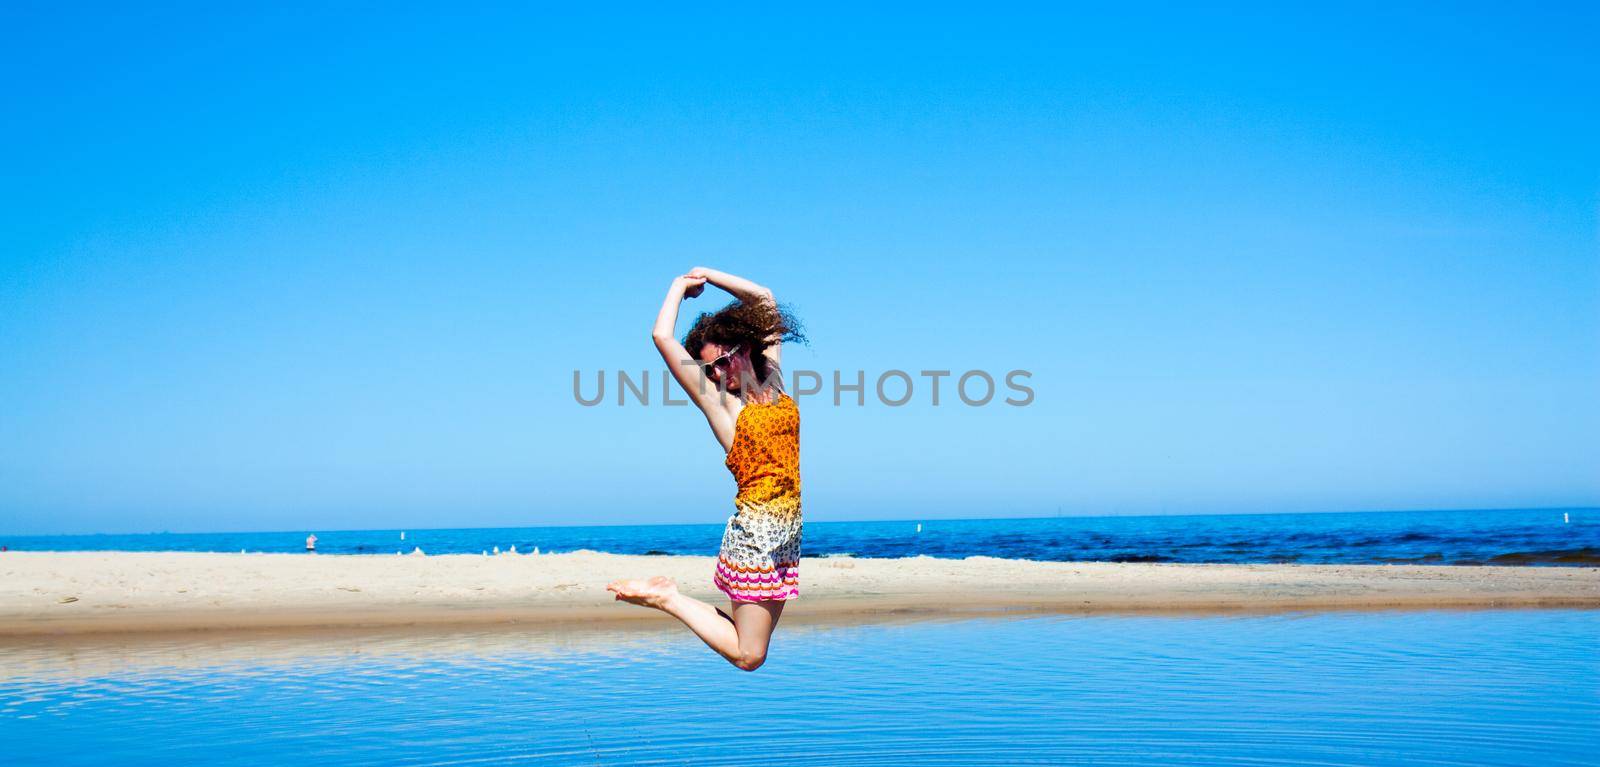 Woman with dark curly hair jumping in a bright blue lake with white sand dunes and a blue sky in the background by njproductions